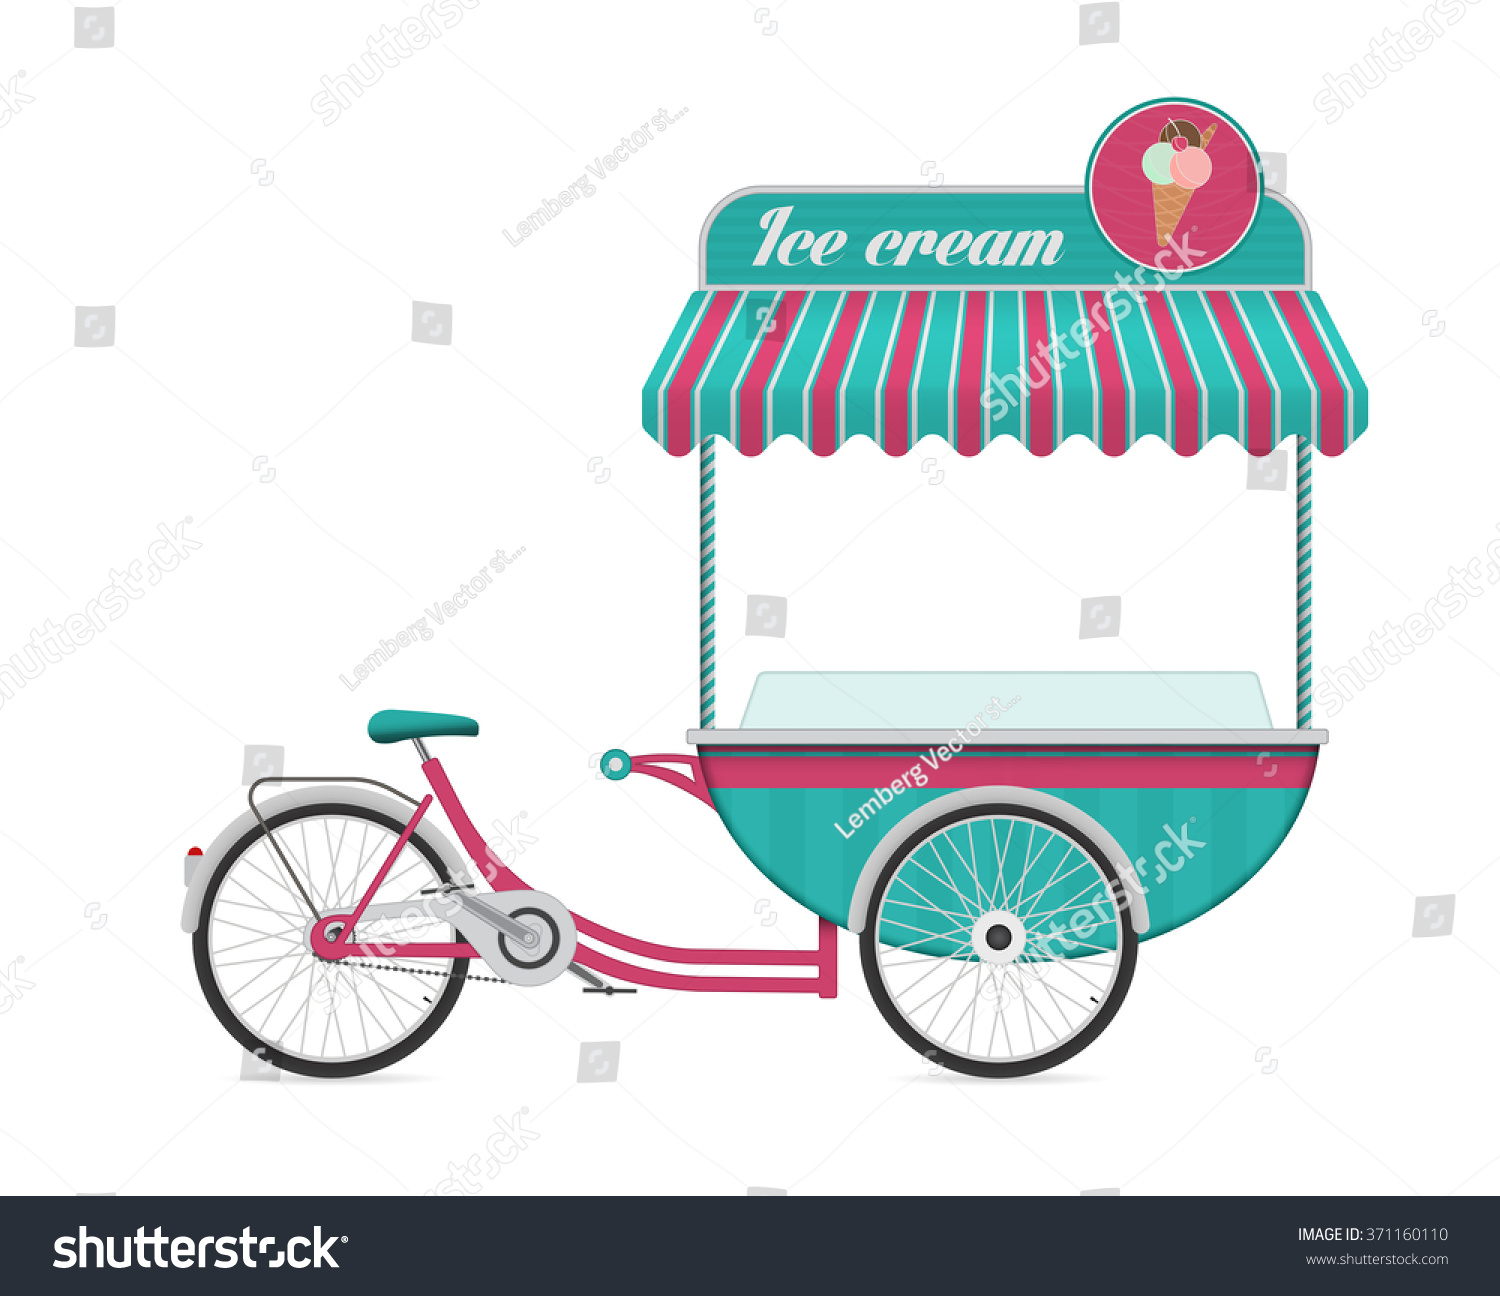 SVG of Vintage ice cream bicycle cart bus vector illustration. svg